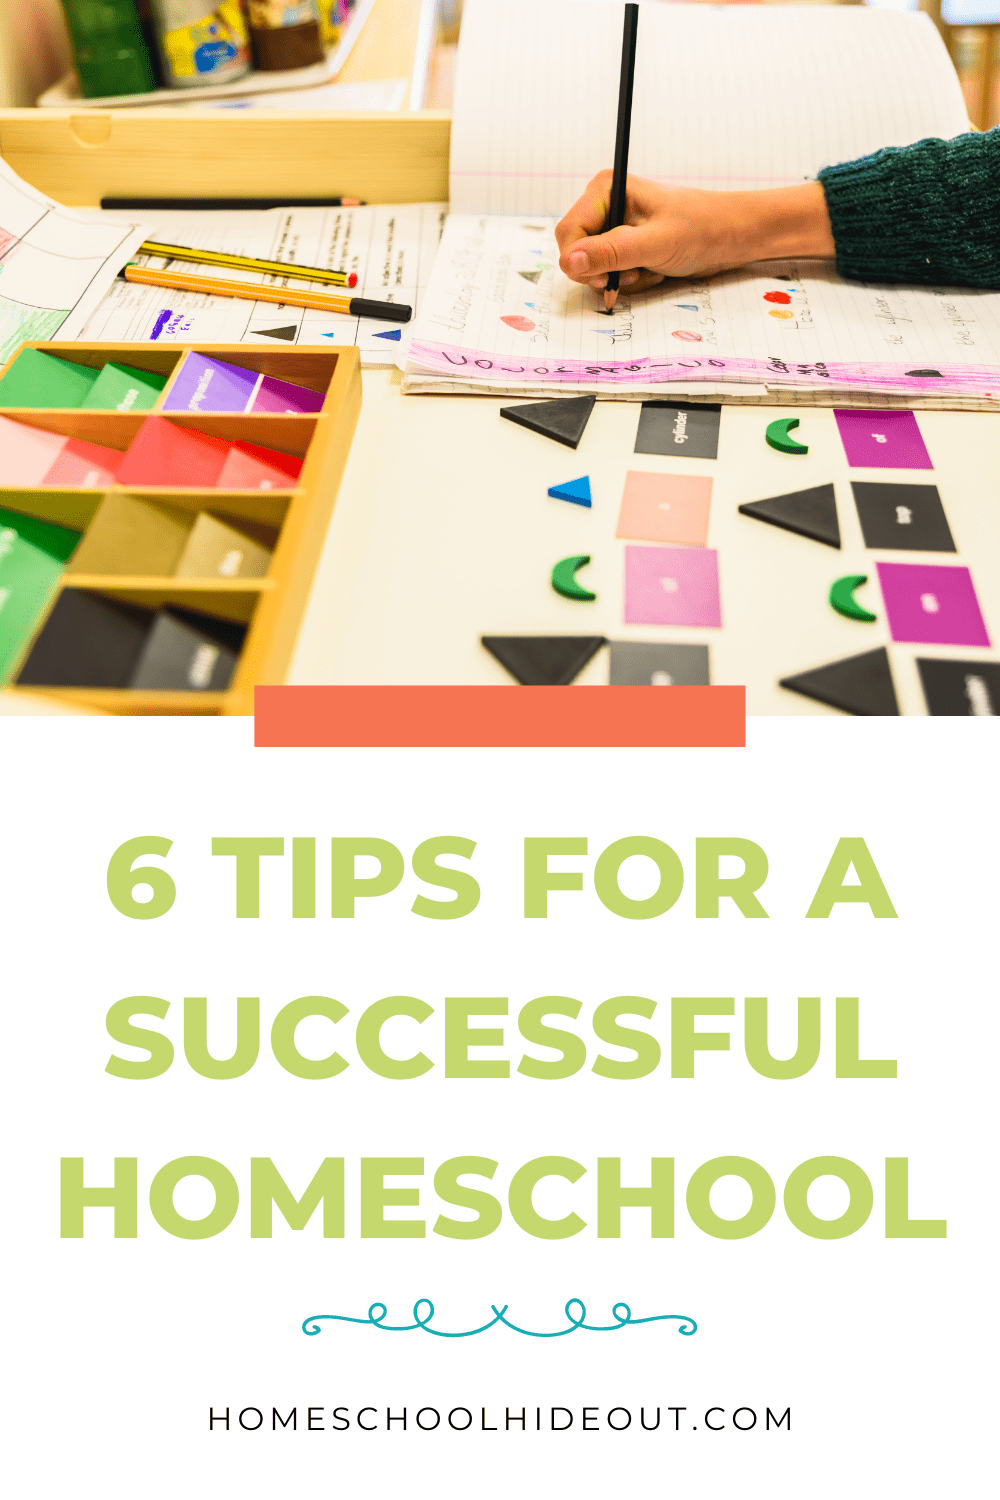 These tips for a successful homeschool are genius. I wouldn't have thought of #4!